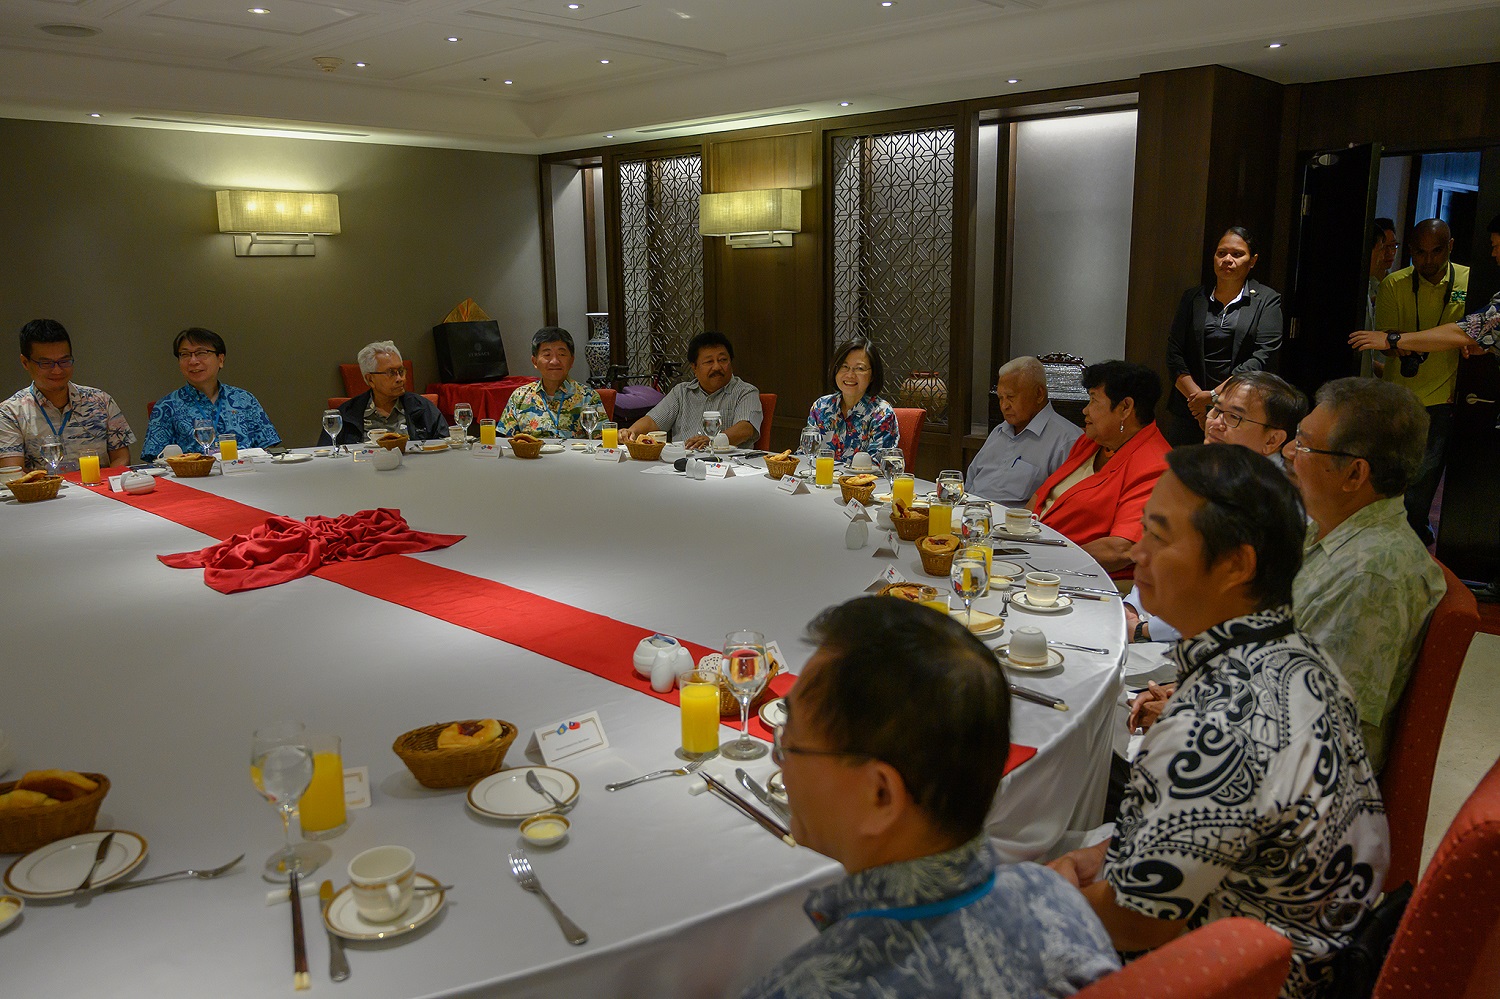 President Tsai attends breakfast meeting with President Remengesau and traditional leaders